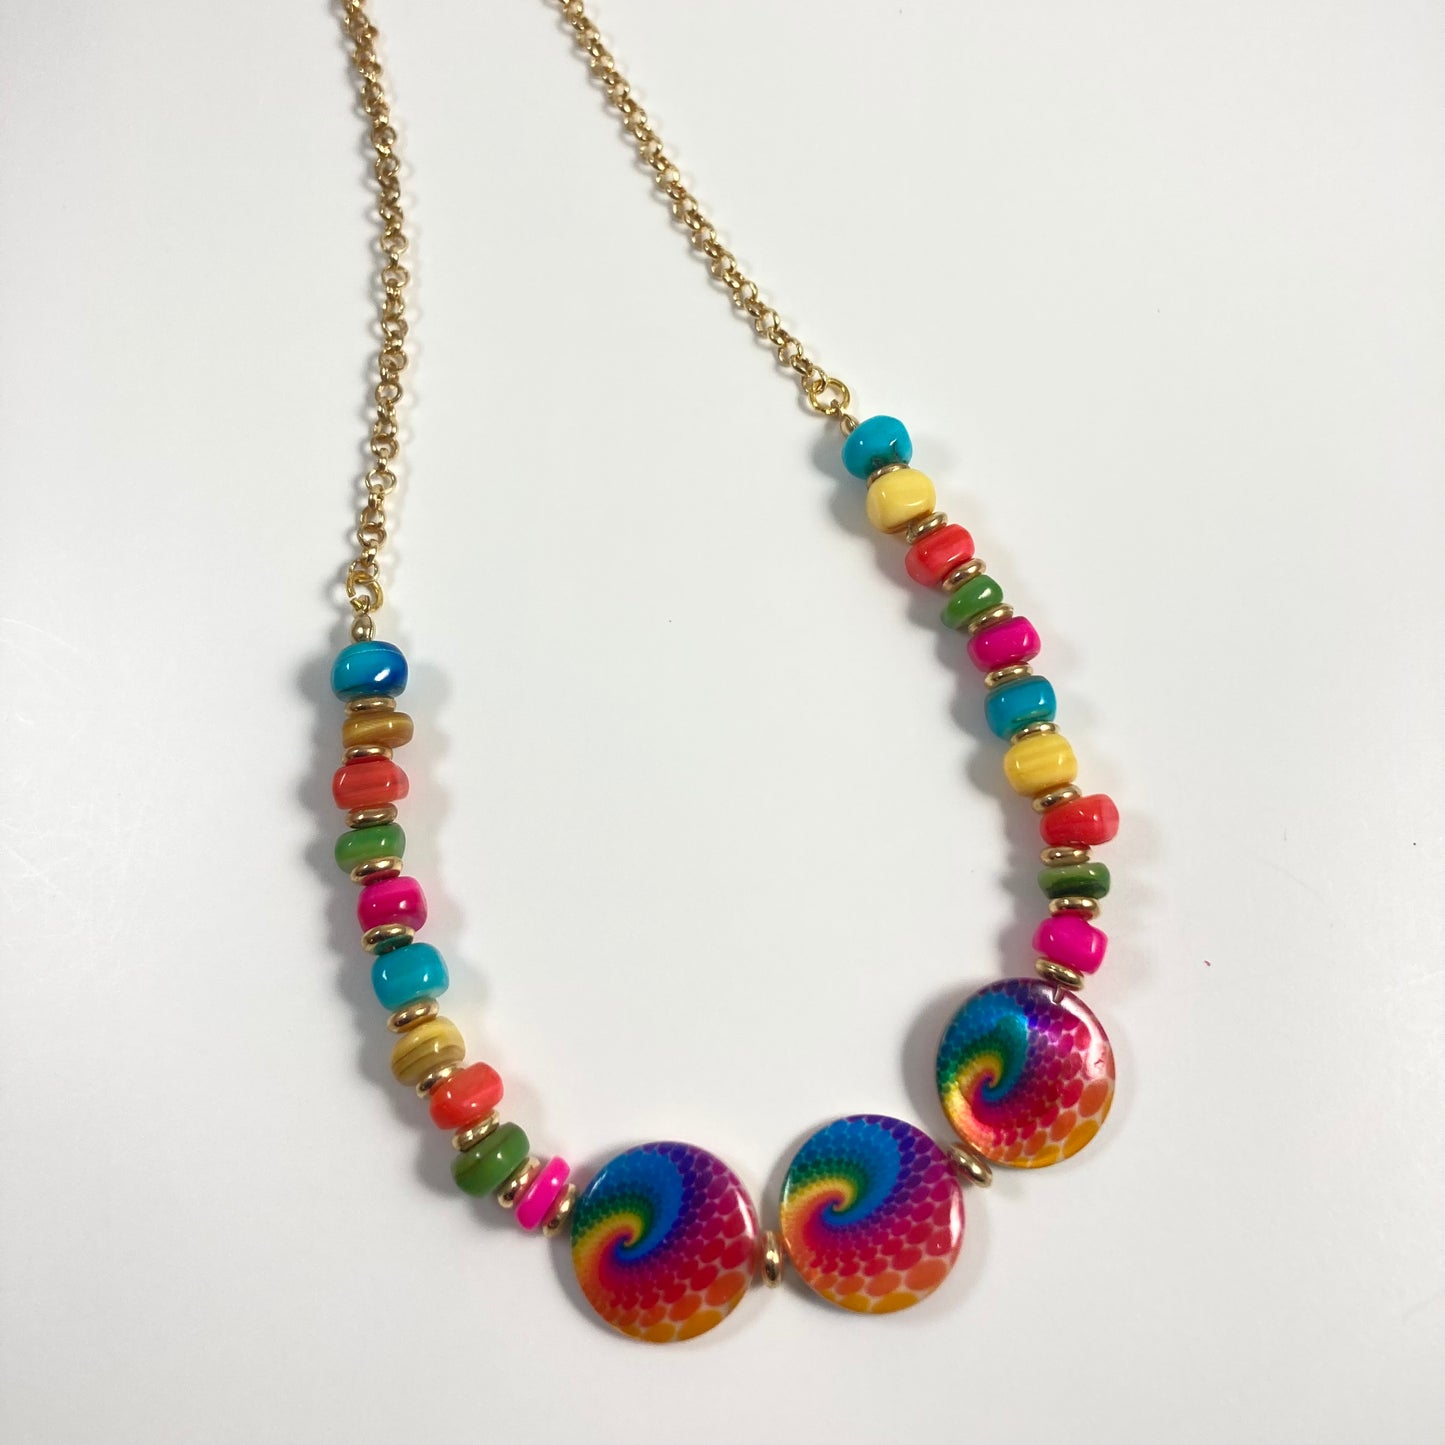 N24-C1 - Orange, Yellow, Green, Blue & Gold Necklace with Multi-Colored Disc Focal